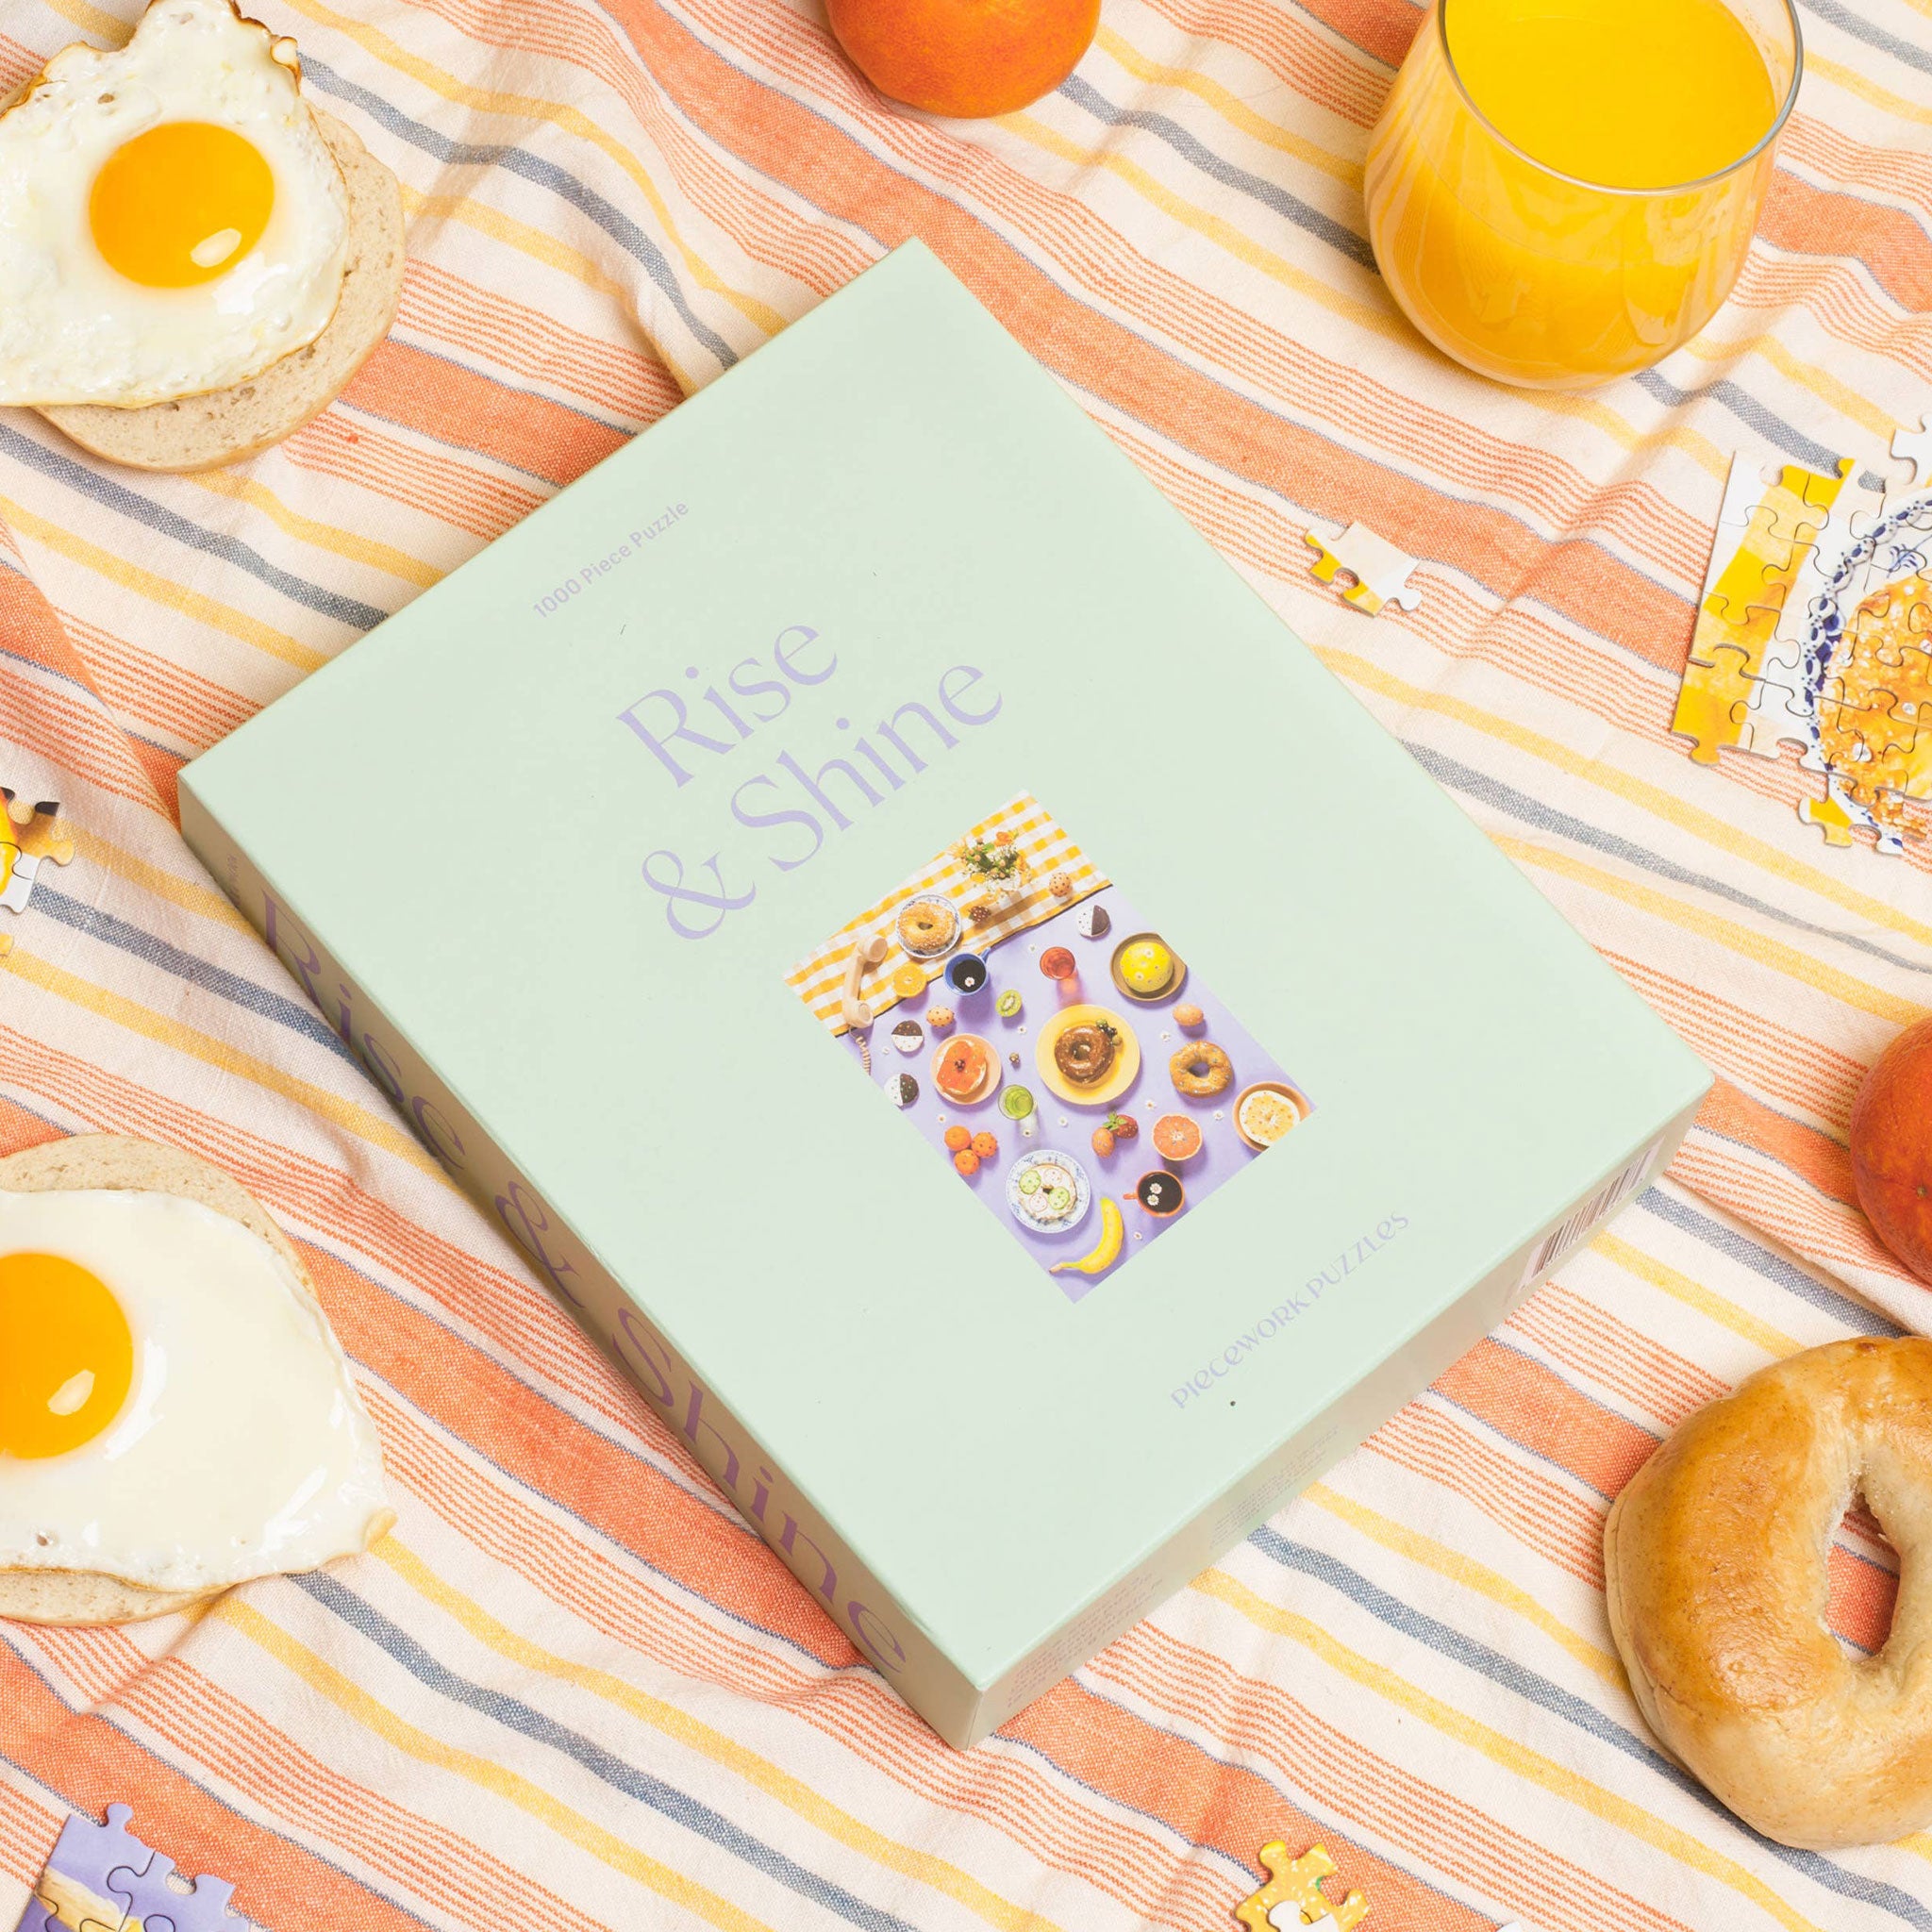 A mint green cardboard boxed puzzle with the words &quot;Rise &amp; Shine&quot; in a light purple text along with an image of an array of bedazzled breakfast items including bagels, fruits, sunny side up eggs and more.